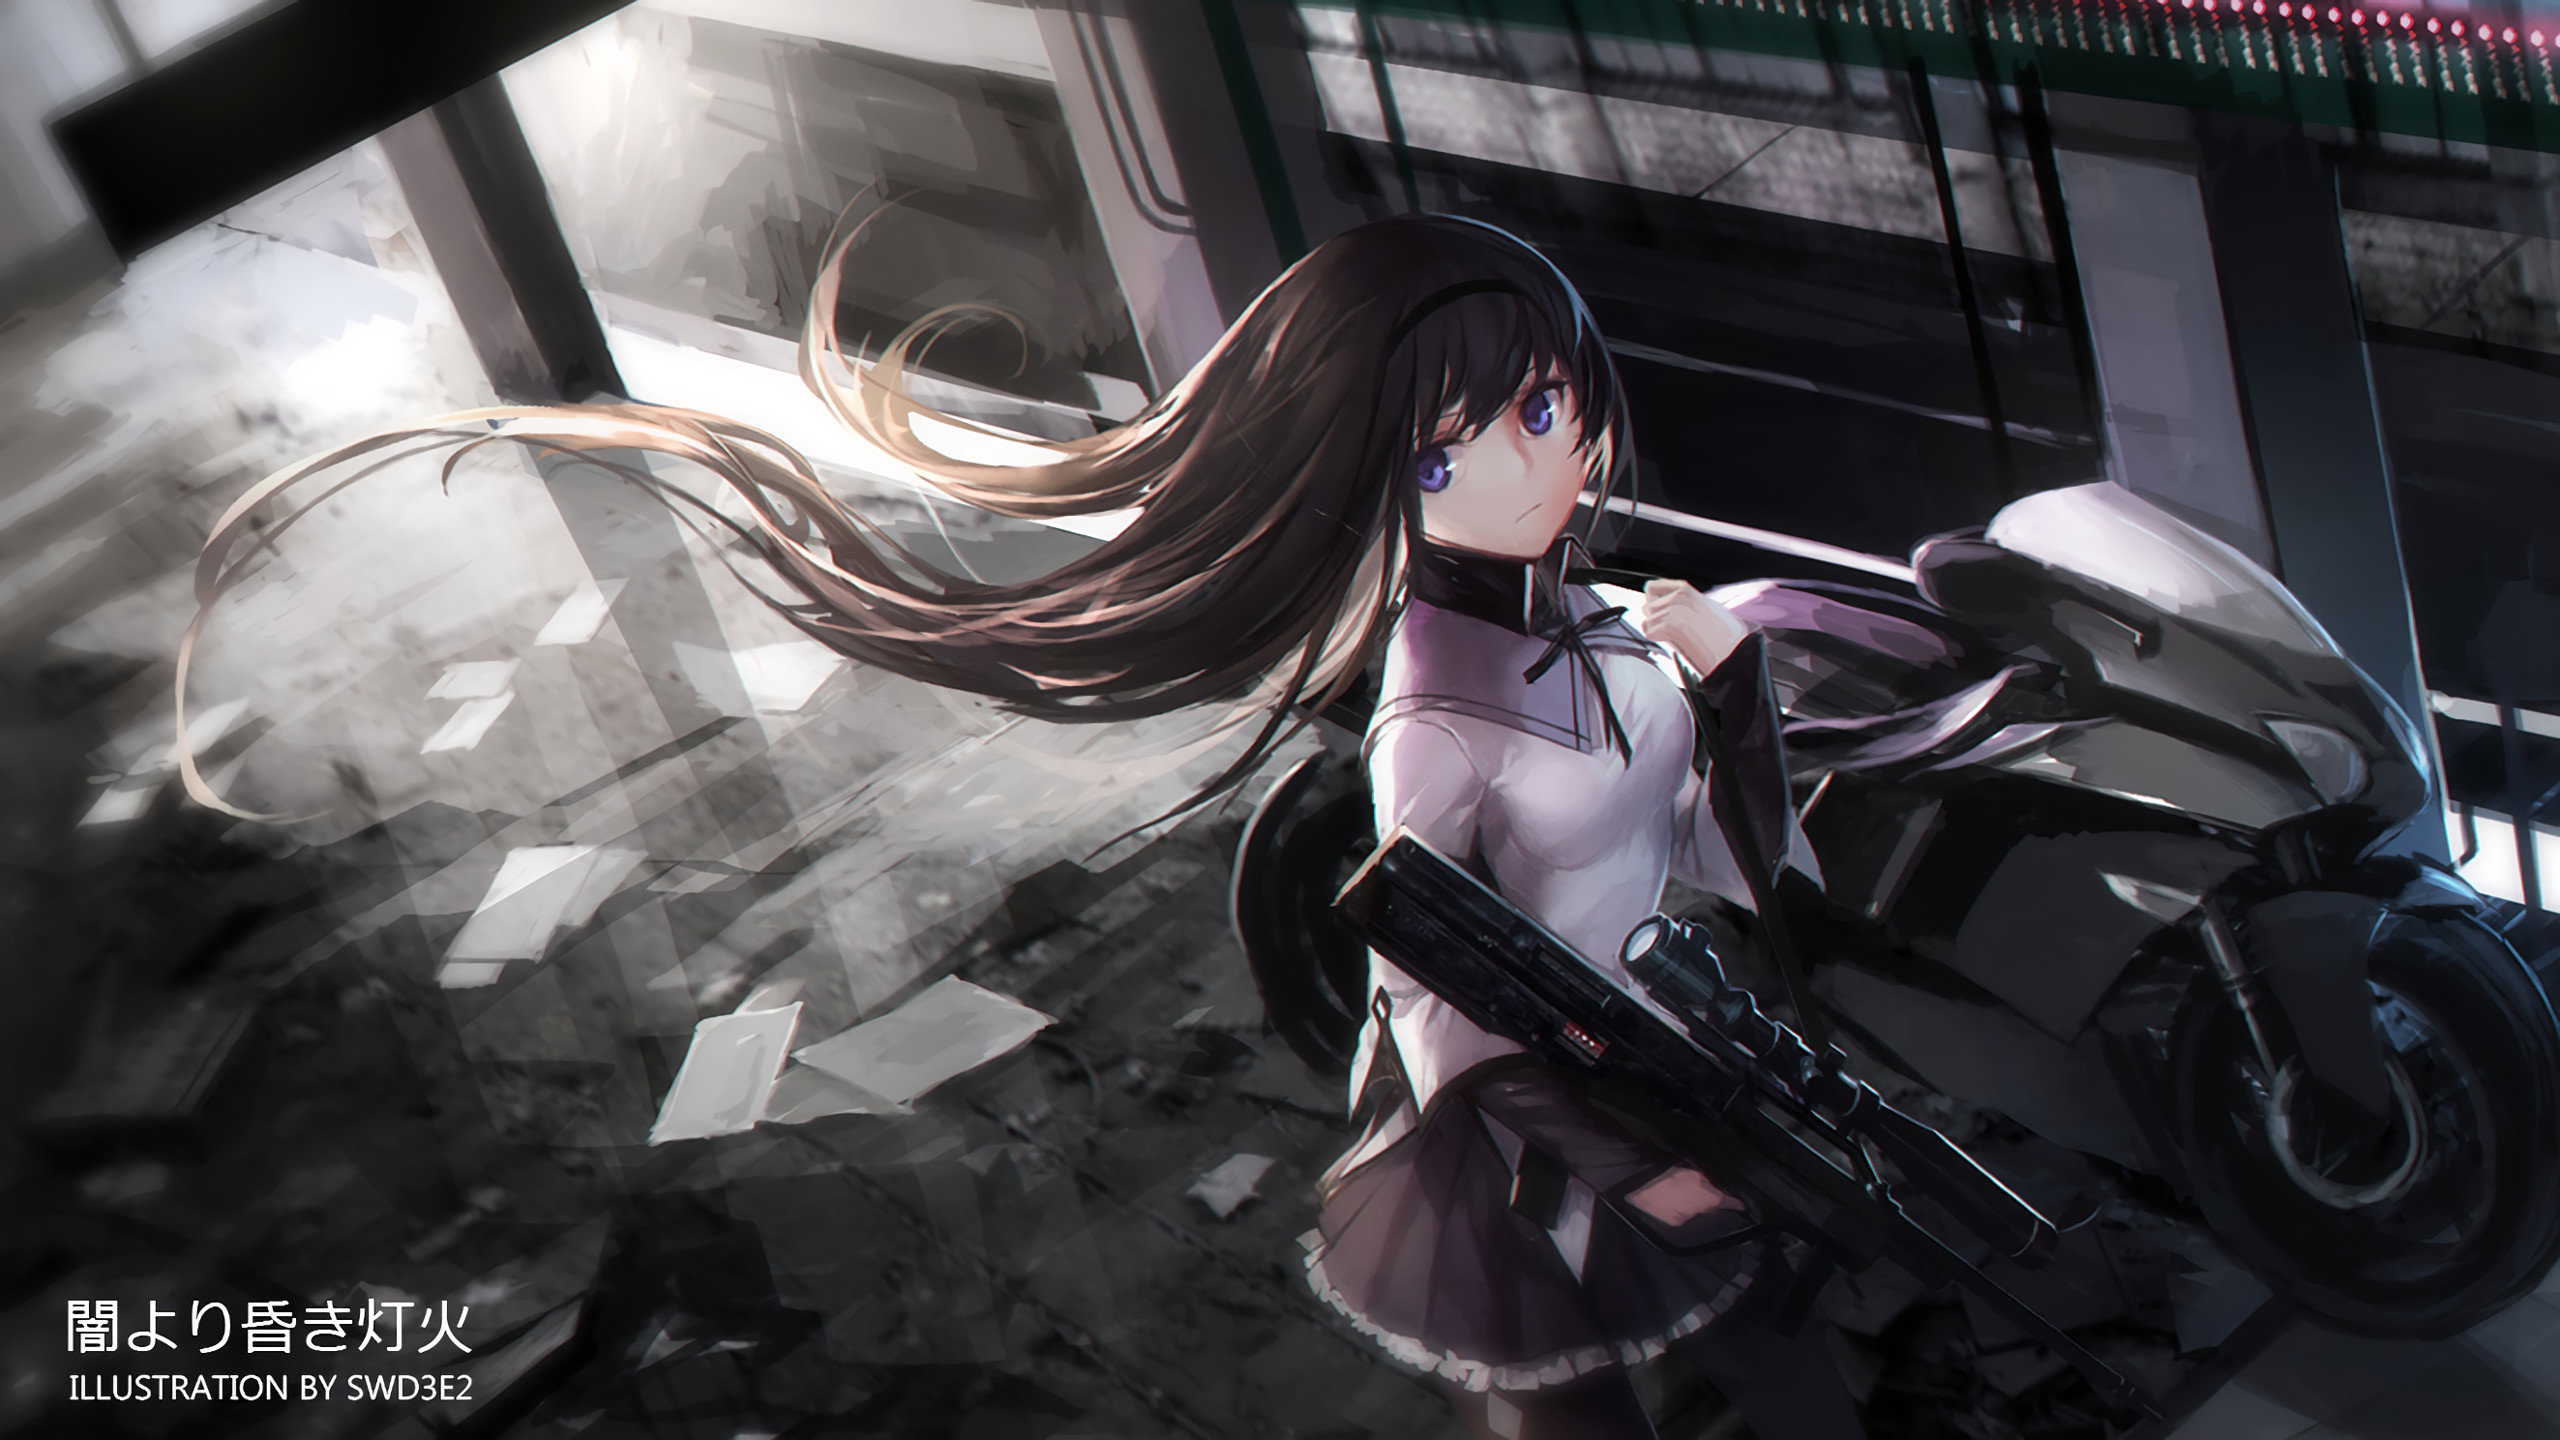 Download hd 2560x1440 Homura Akemi PC background ID:31508 for free